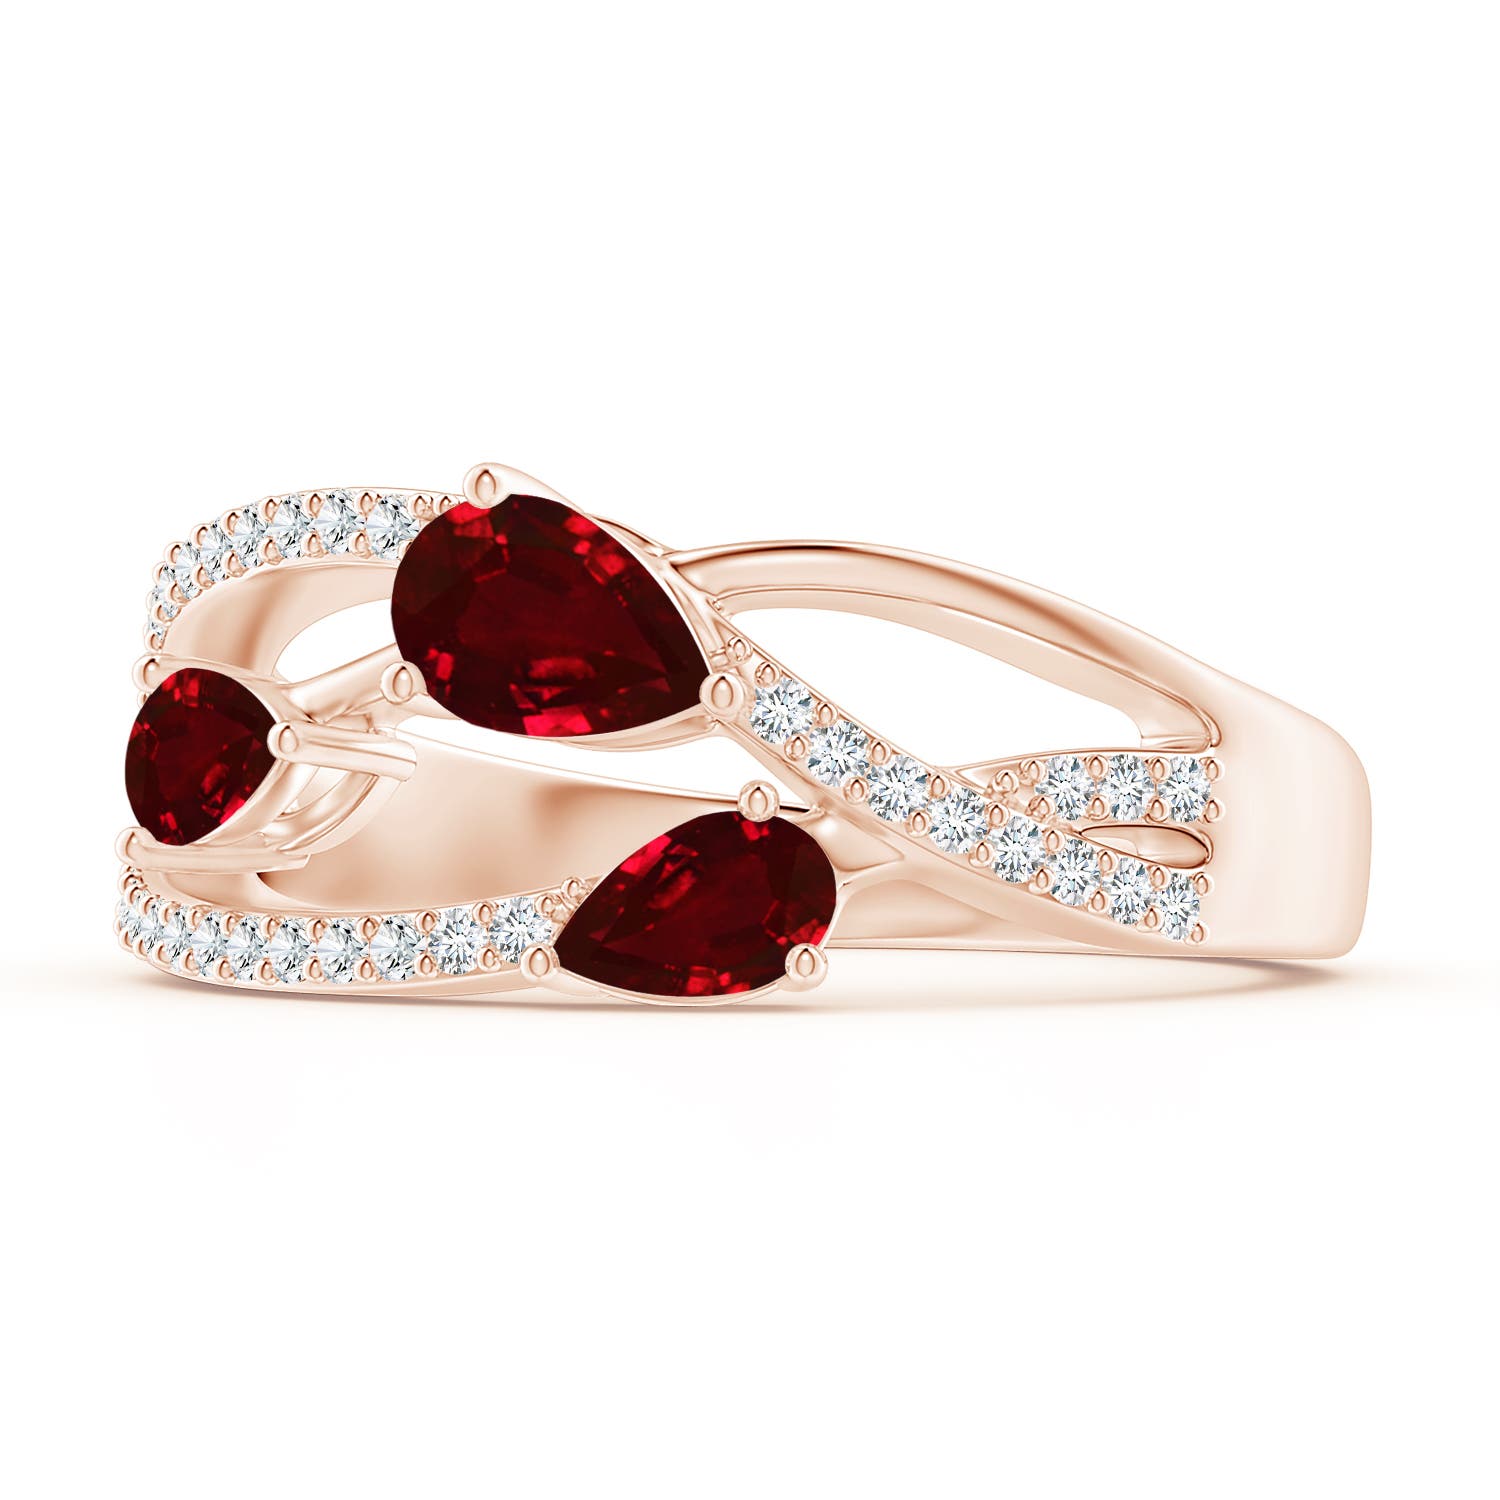 AAAA - Ruby / 1.03 CT / 14 KT Rose Gold